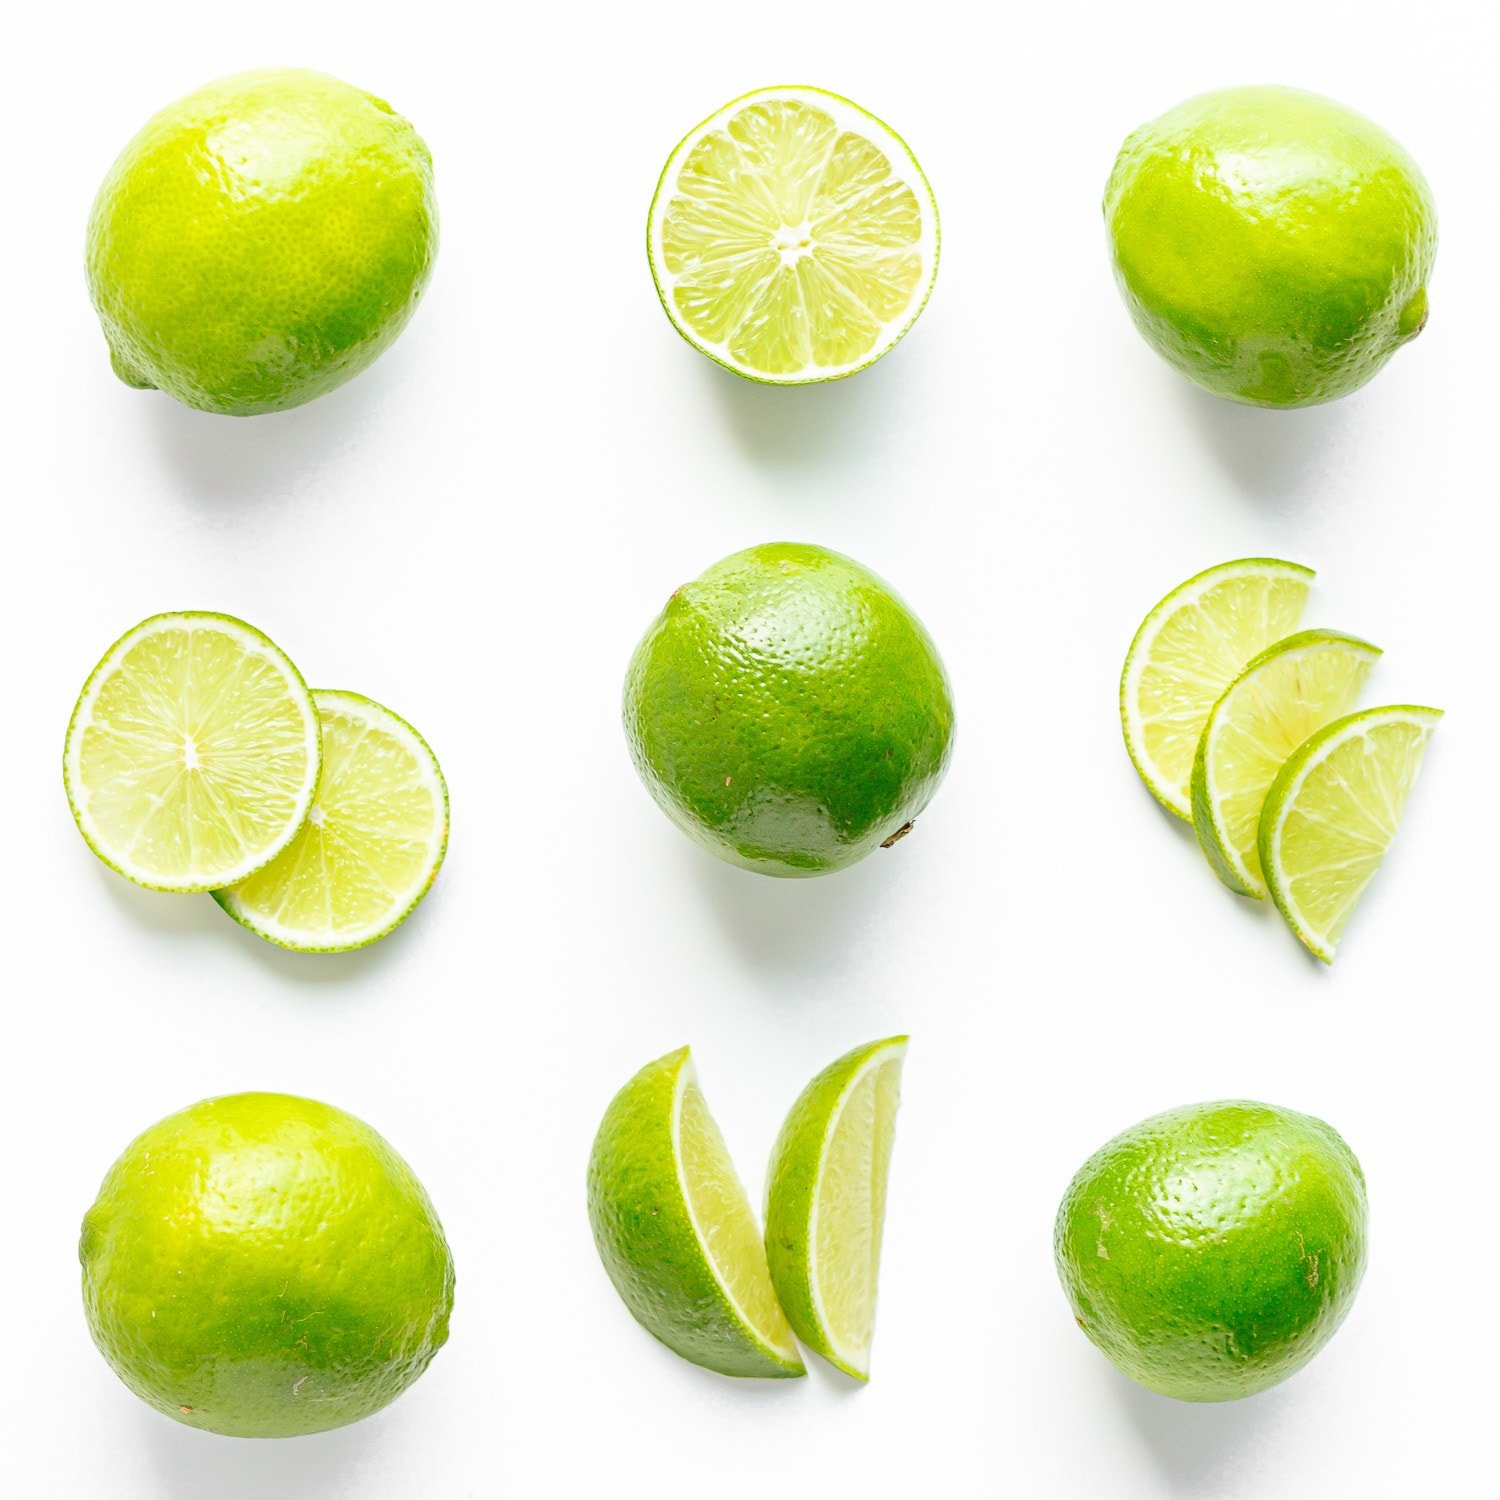 Flat lay of limes cut in various ways on a white background.